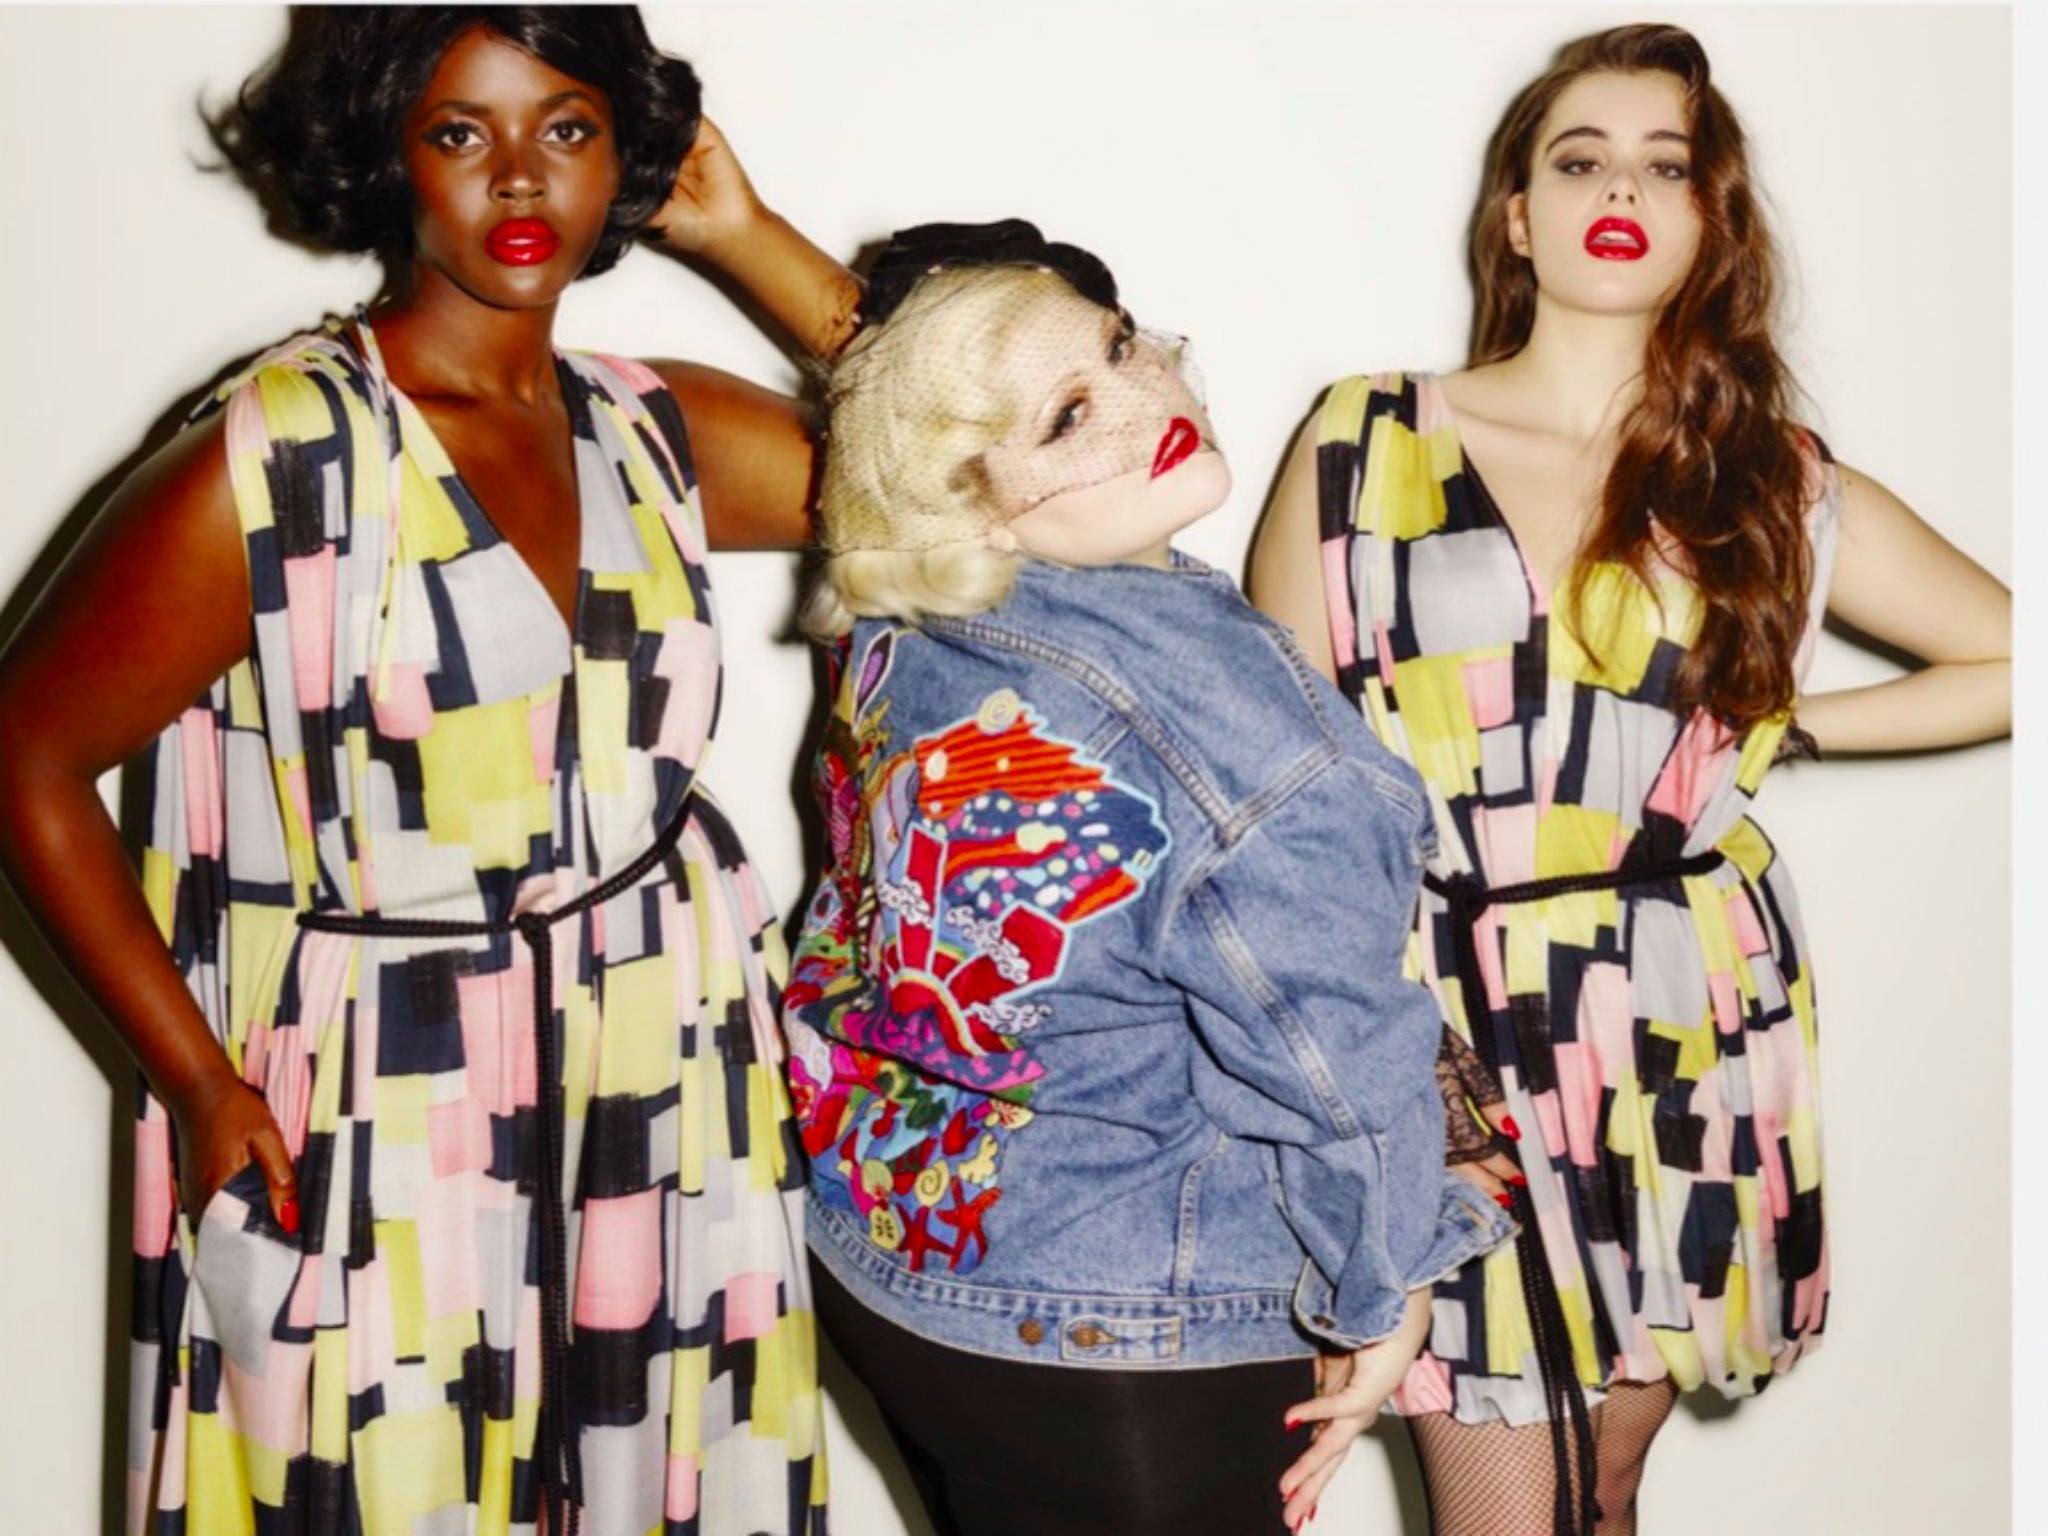 Beth Ditto's collection